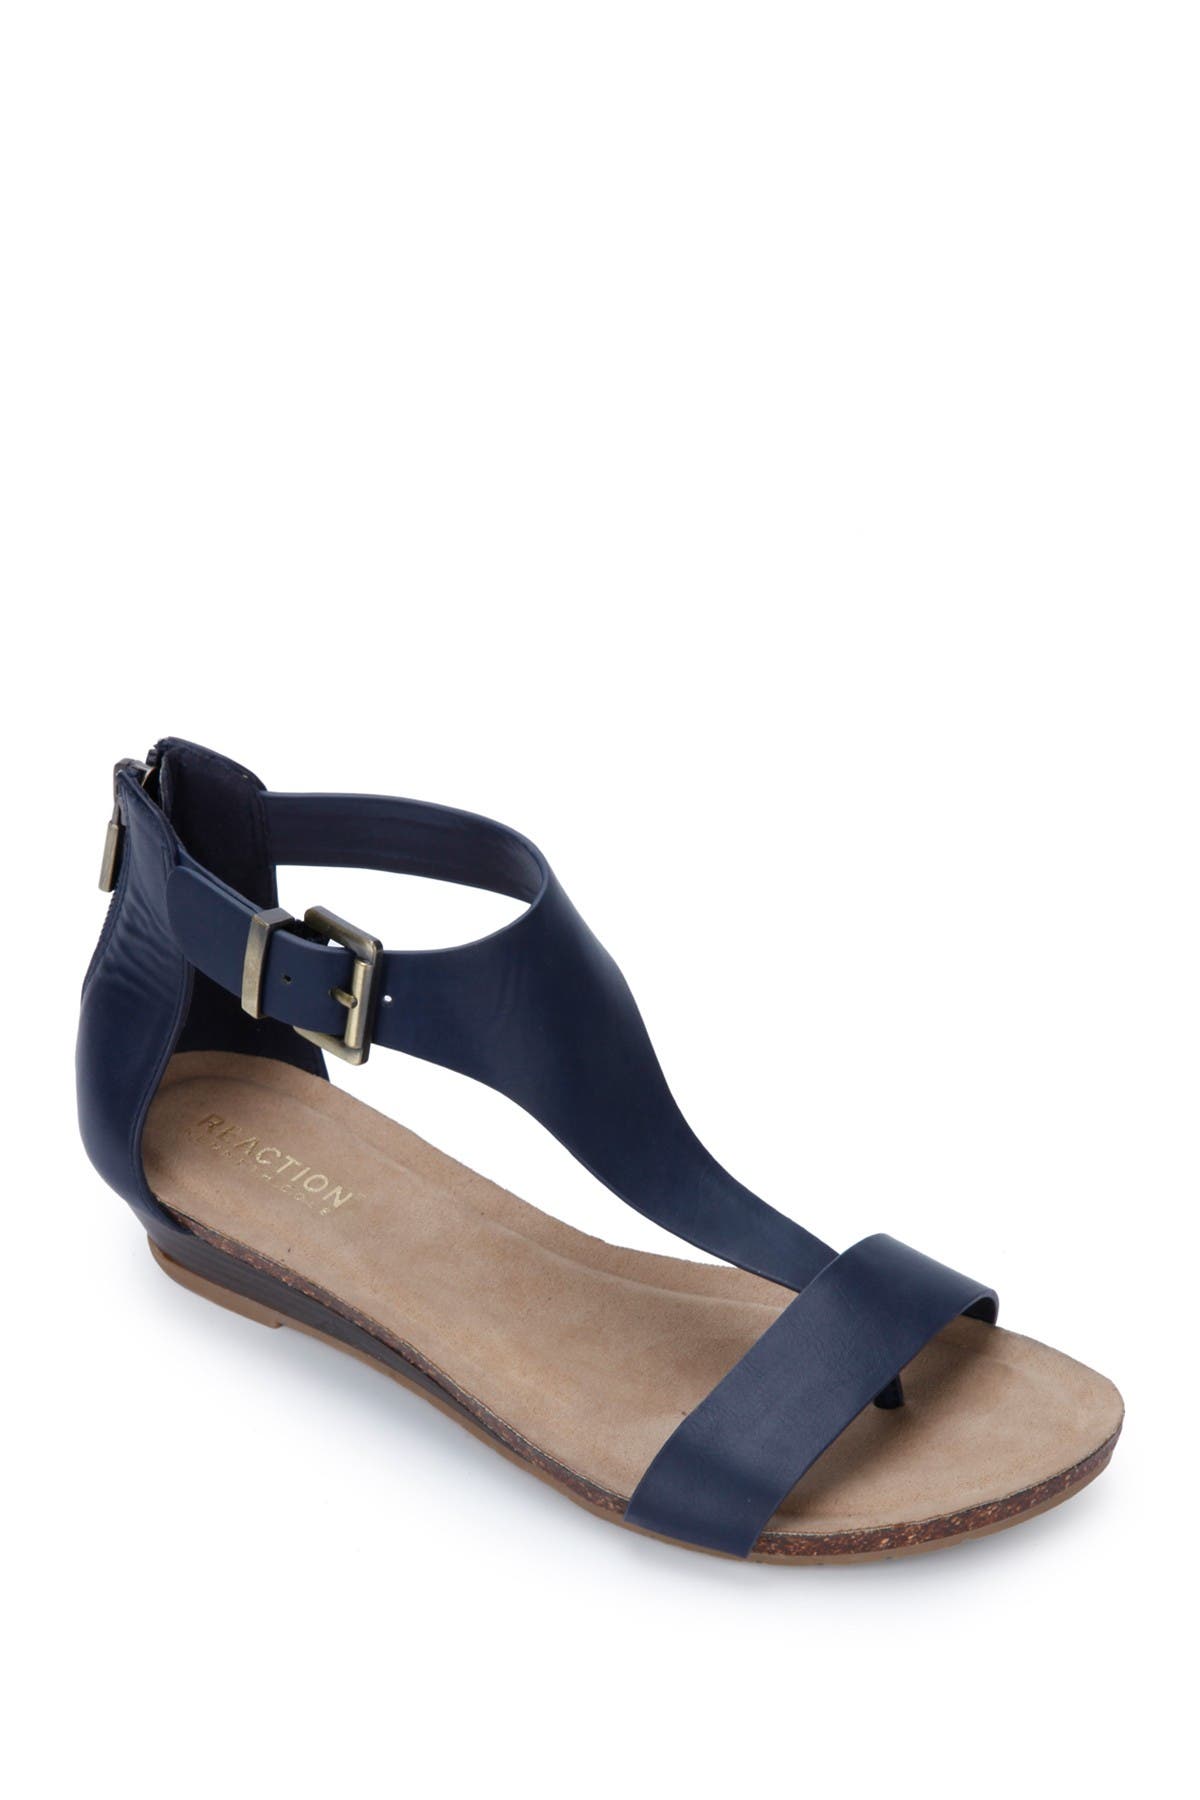 Kenneth Cole Reaction Great Gal T-strap Sandal In Navy